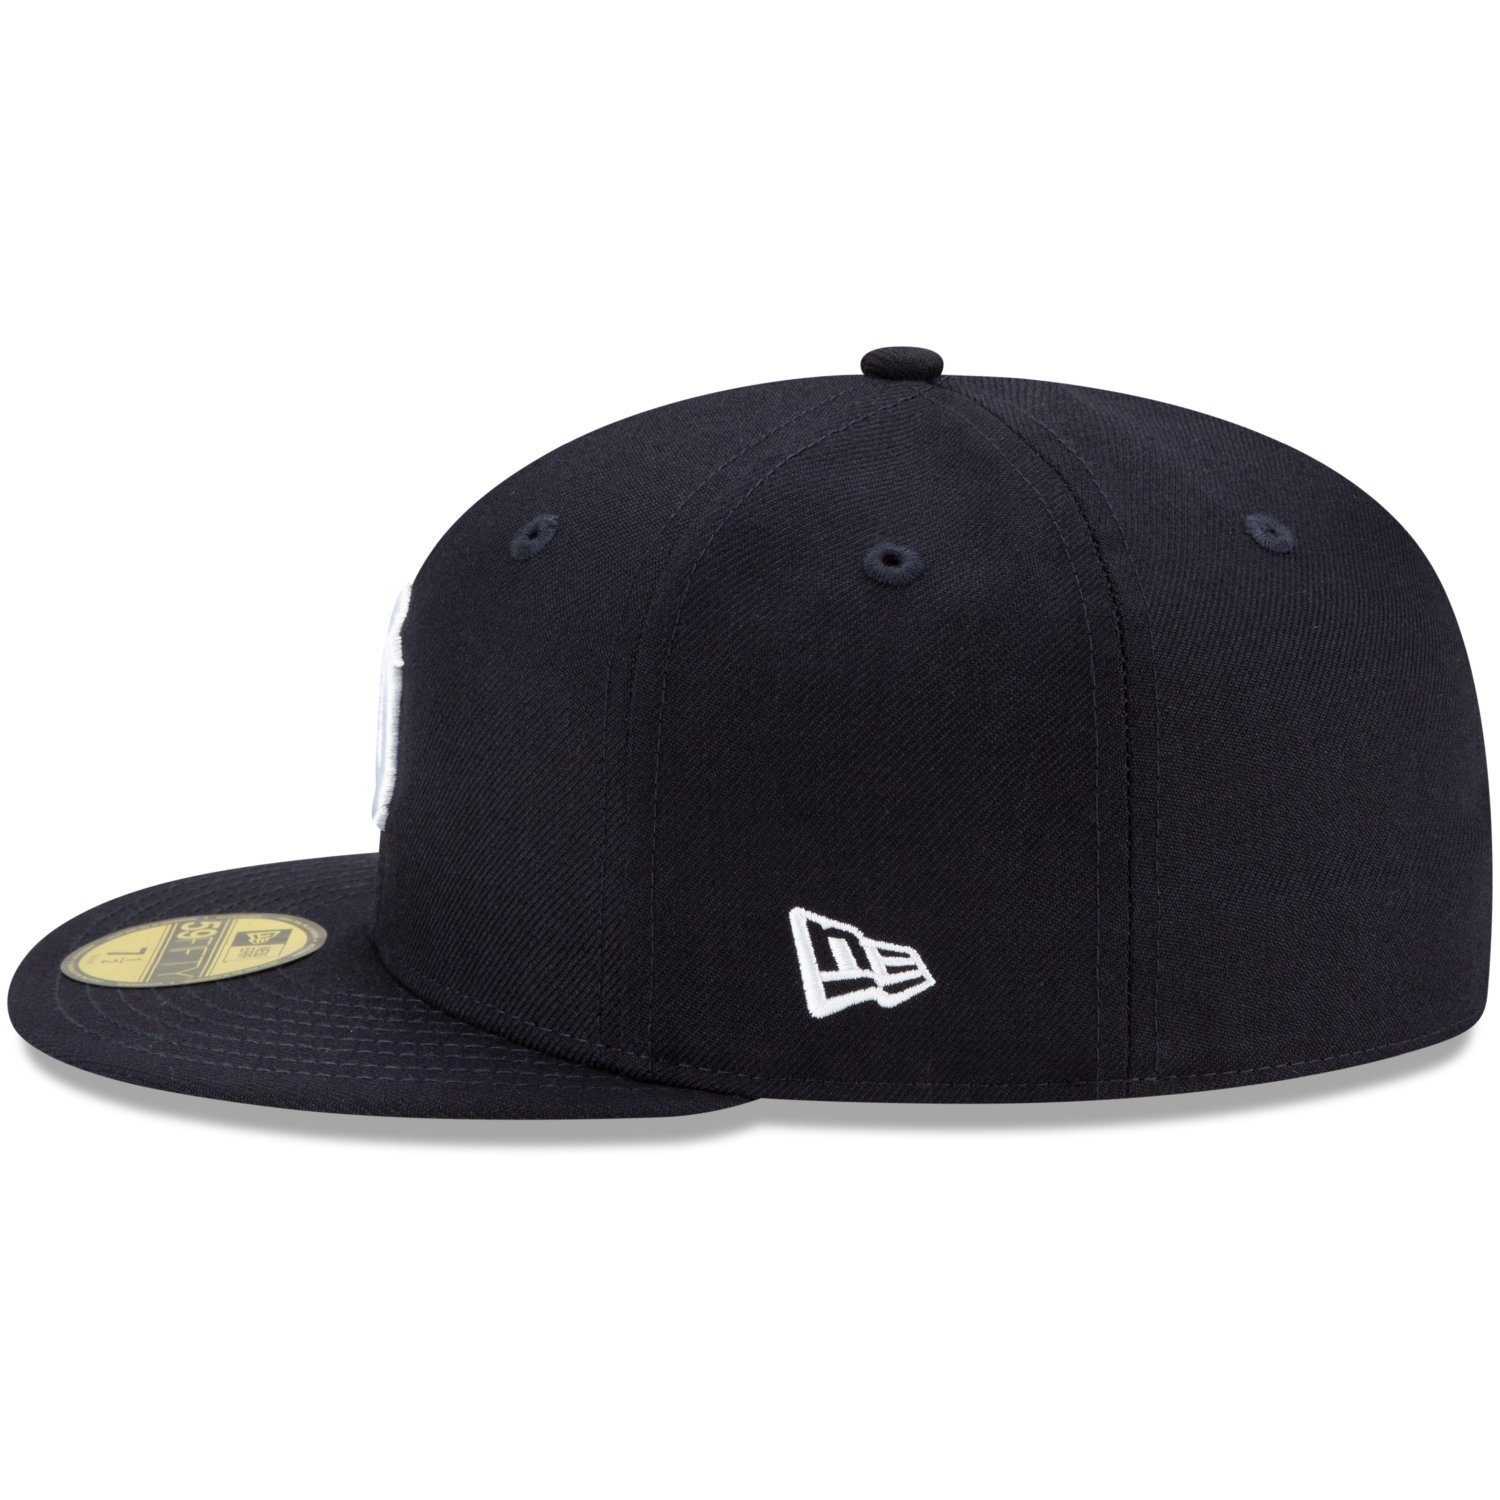 New Era Fitted Cap 59Fifty York Yankees LIFESTYLE New